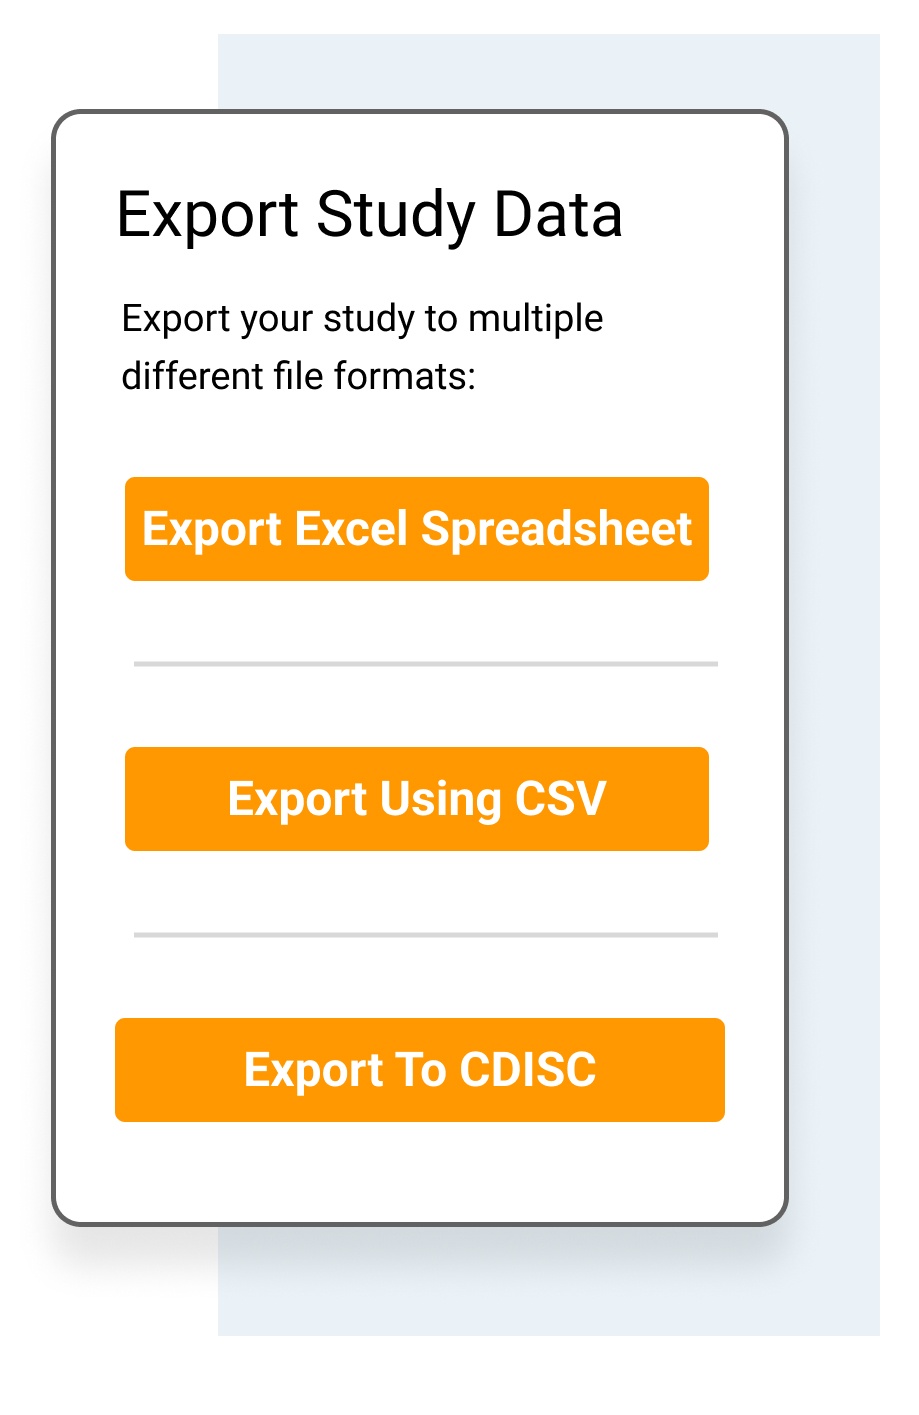 An illustration for exporting study data, there are mutliple formats. Export to: Excel spreadsheet, export using CSV or export to  CDISC.